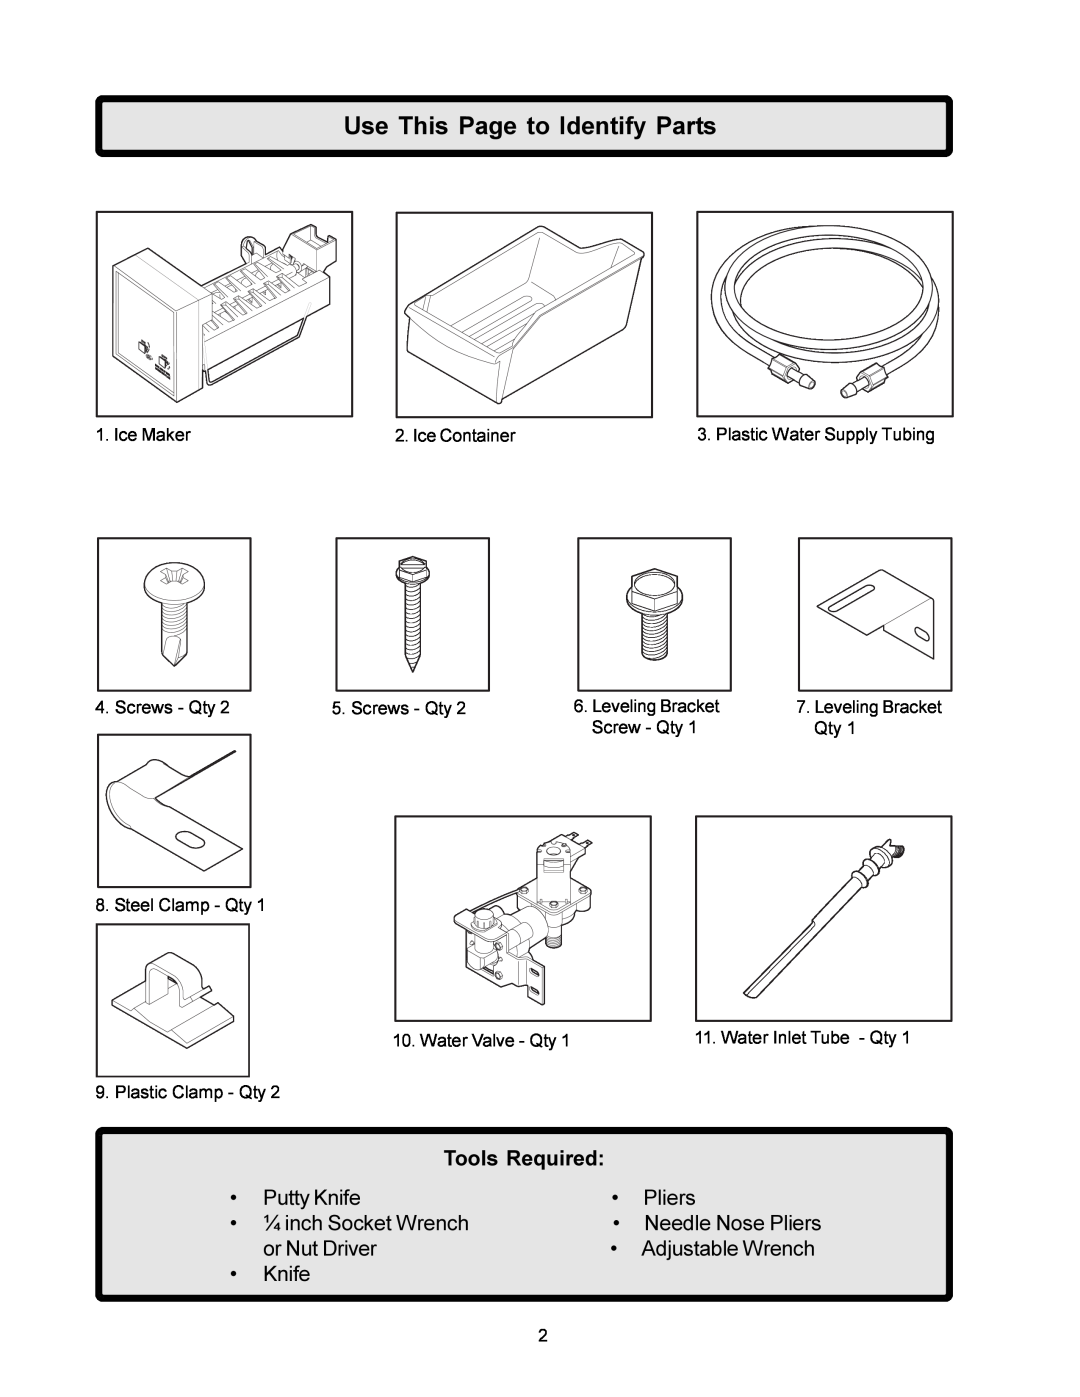 Frigidaire IM115 installation instructions Use This Page to Identify Parts, Tools Required 